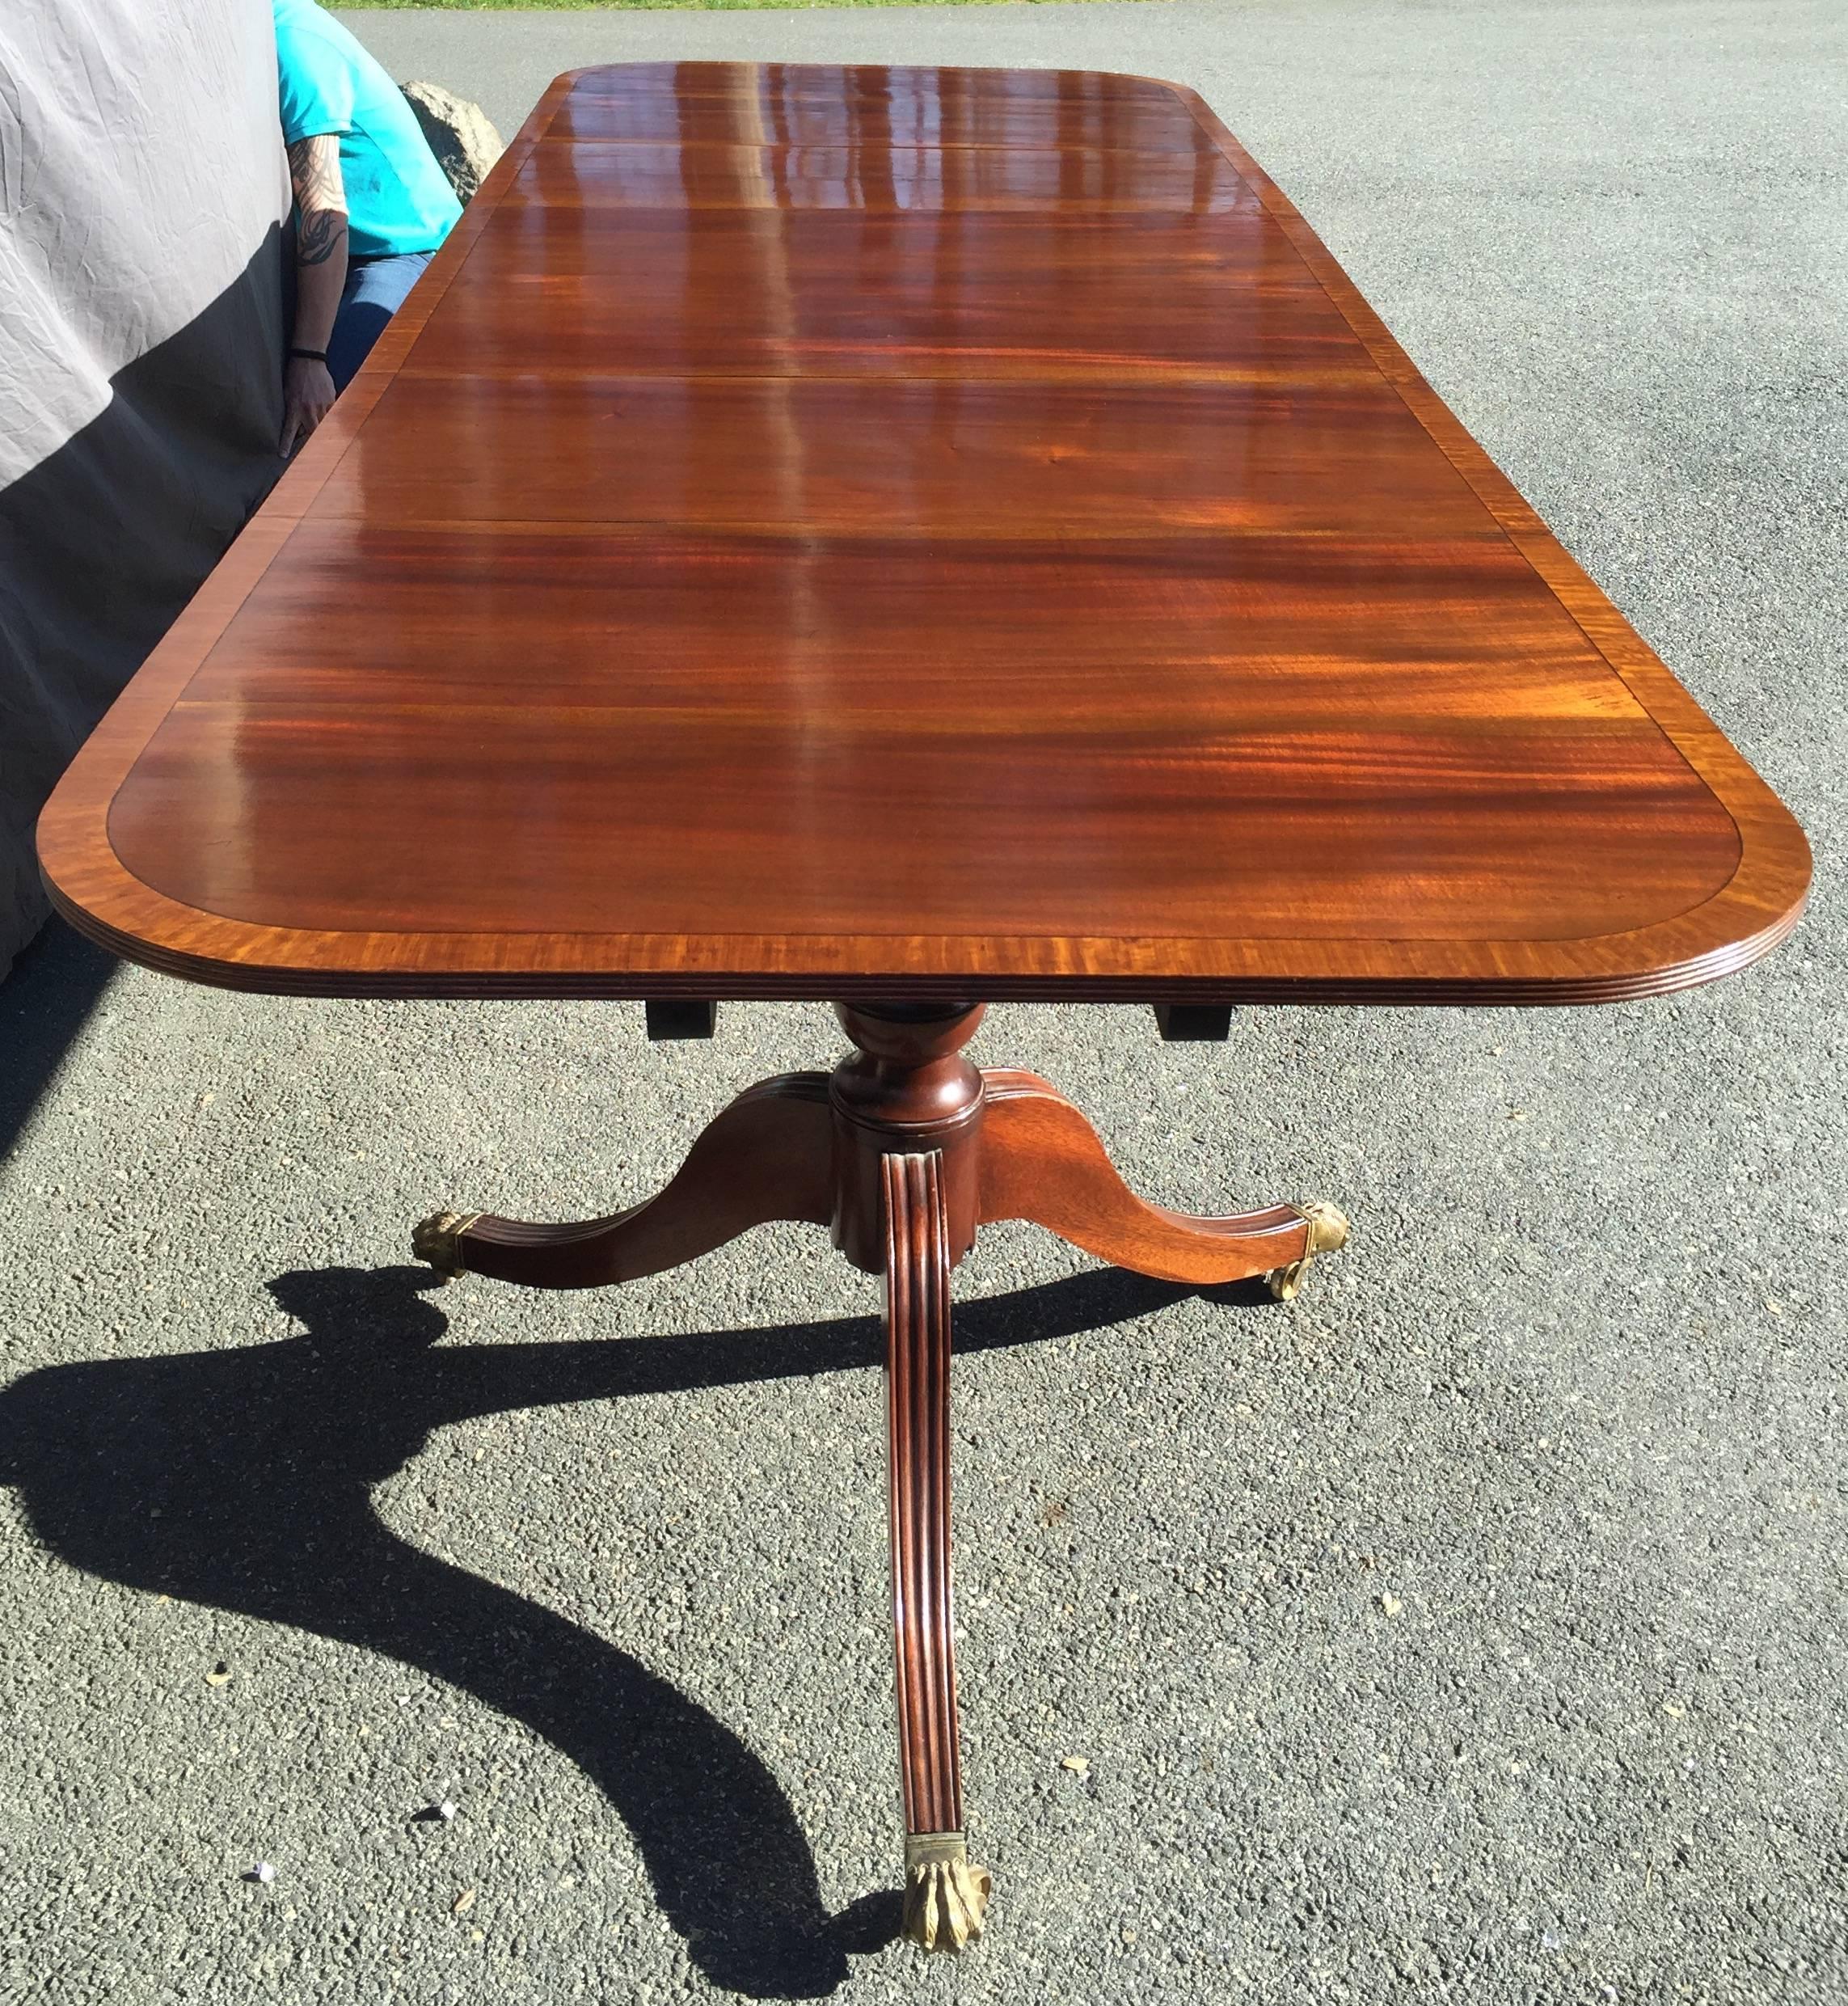 American Mahogany Dining Table with three Pedestals, Banded Top Regency Style 10.5' long